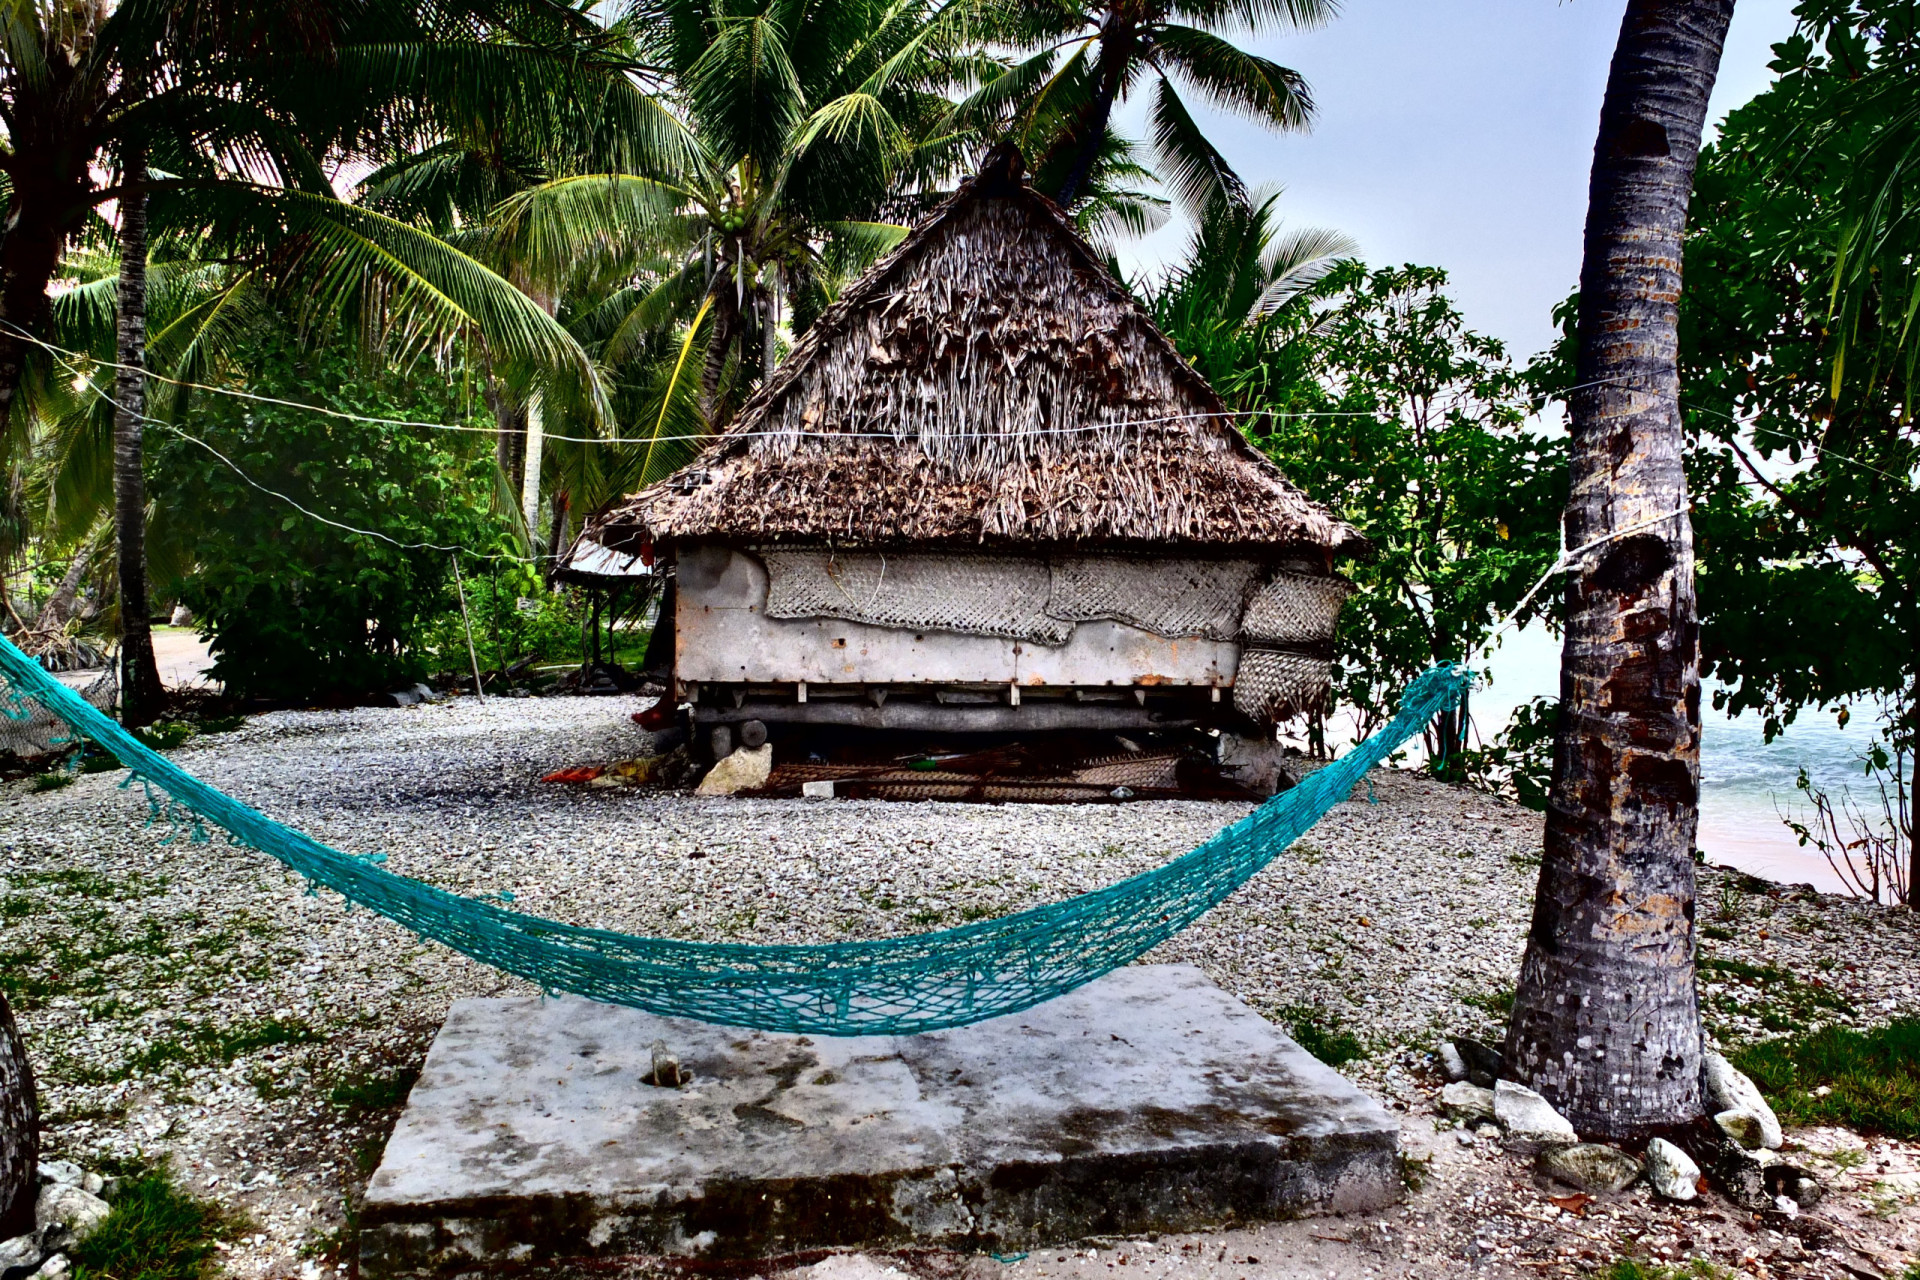 <p>Traditional Kiribati housing (known as "buia" or “maneaba”) is typically constructed from locally sourced materials like pandanus leaves and wood, although modern concrete homes are becoming more common in urban areas.</p><p>You may also like:<a href="https://www.starsinsider.com/n/173153?utm_source=msn.com&utm_medium=display&utm_campaign=referral_description&utm_content=717375en-us"> It's true: some people believe the Earth is flat</a></p>